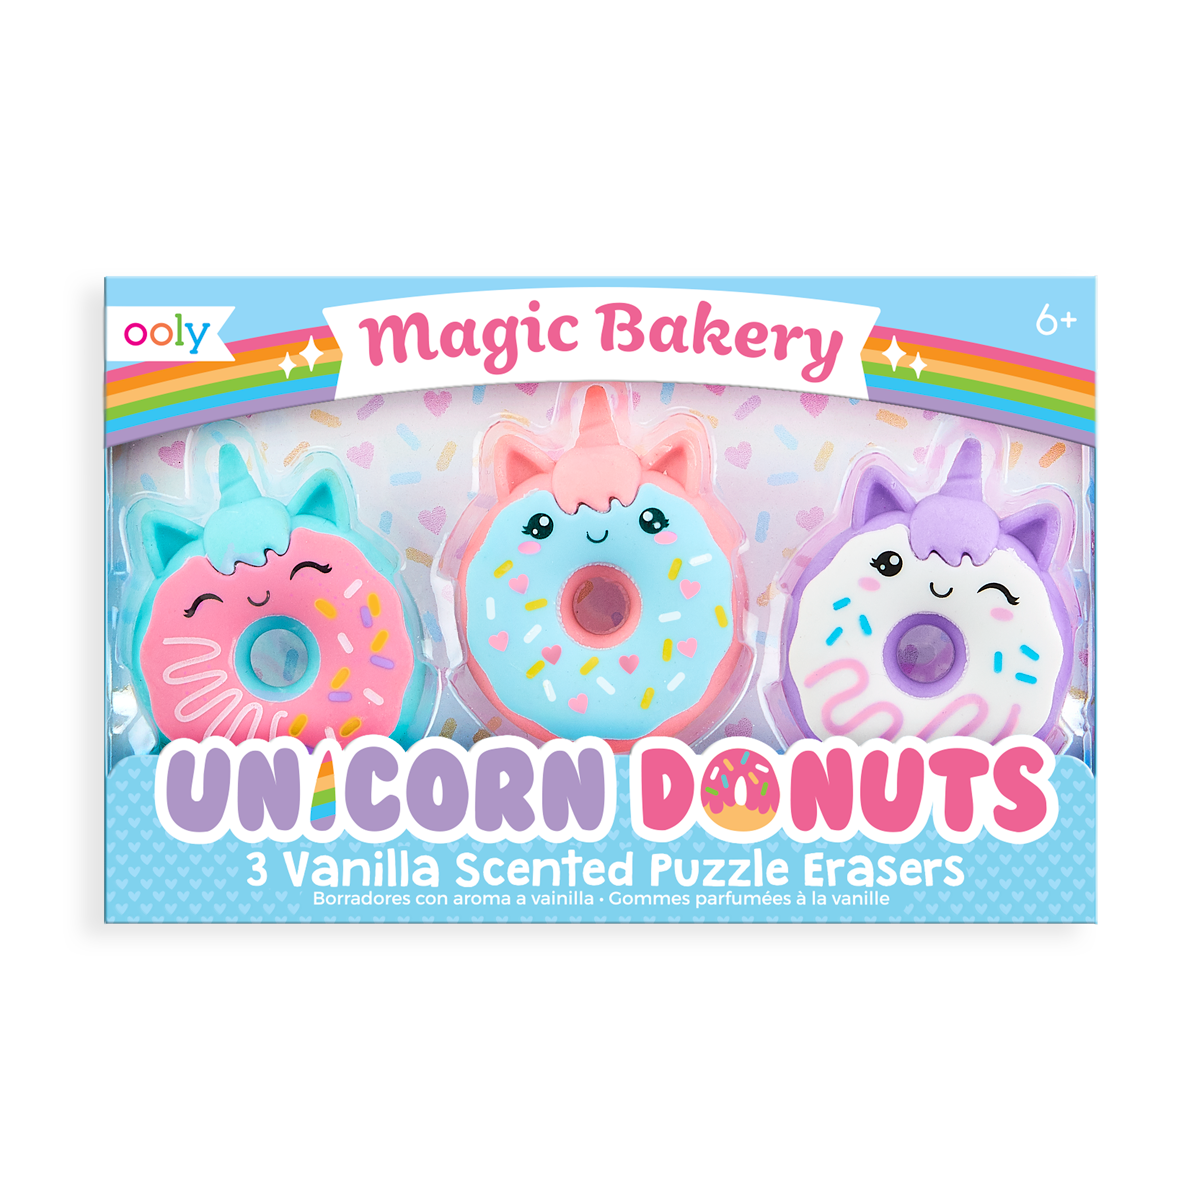 Magic Bakery Unicorn Donut Scented Erasers in package